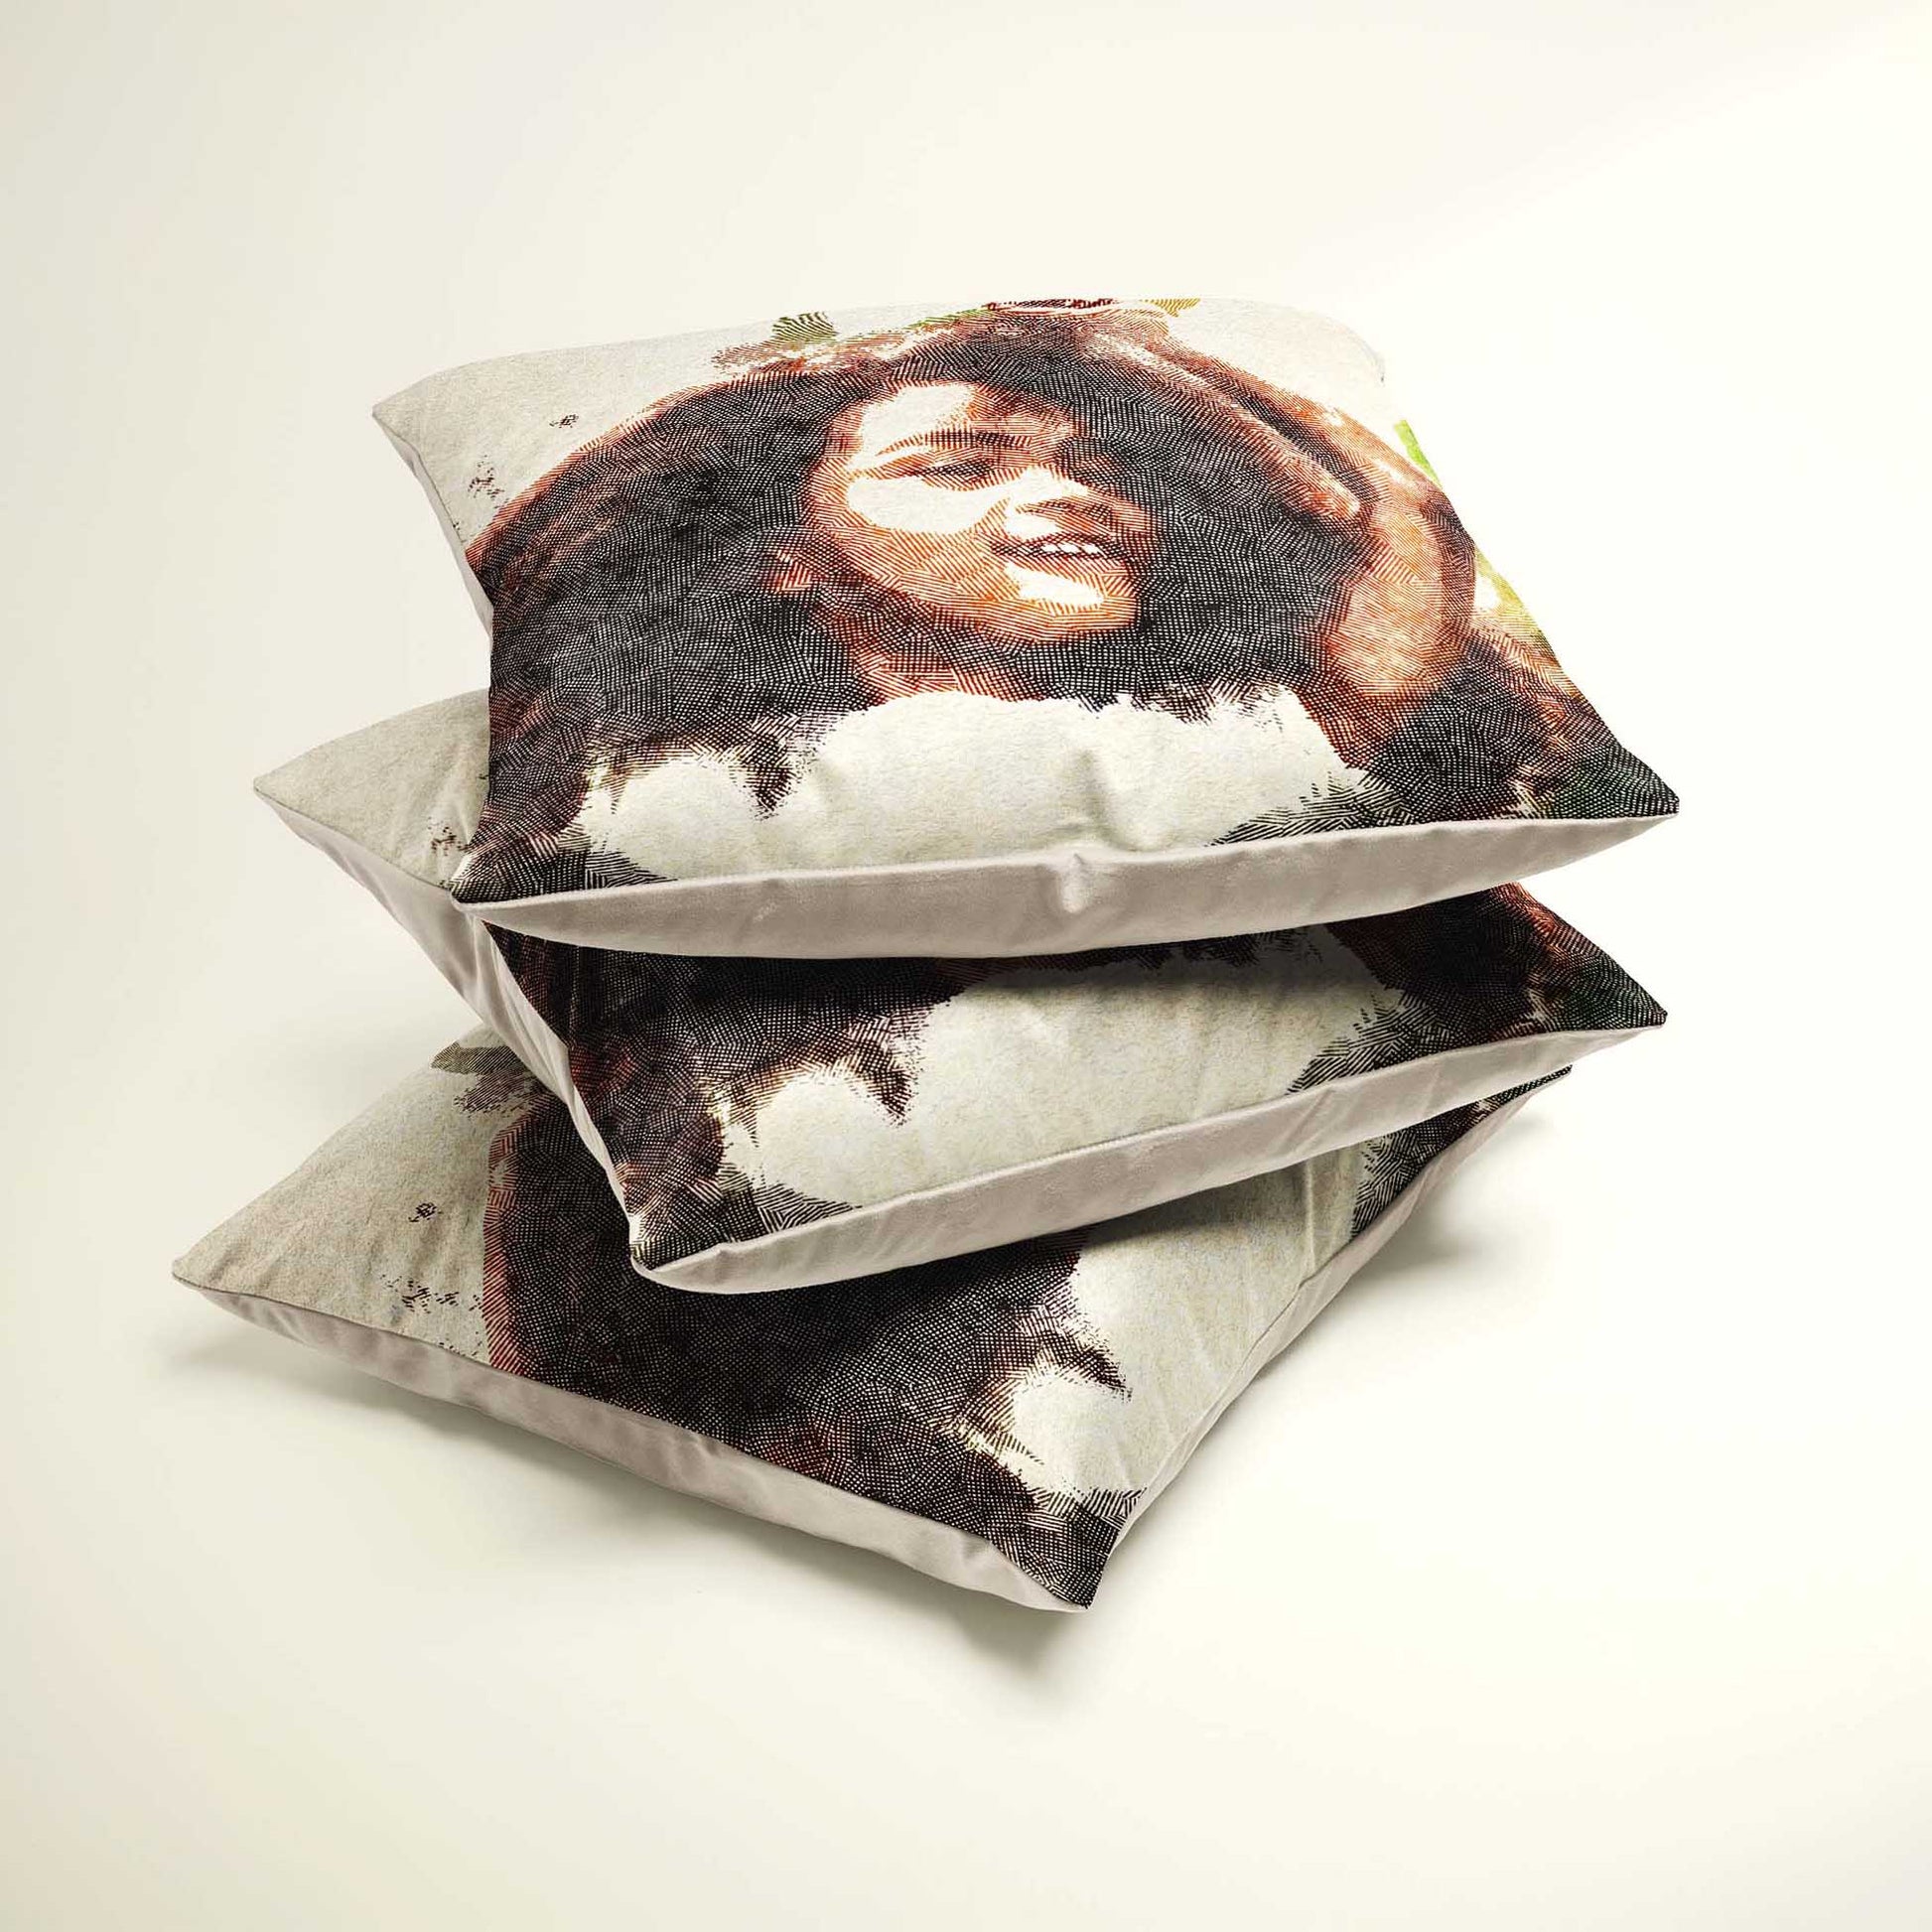 Enhance your interior with the Personalised Crosshatch Cushion, a work of art crafted from your own photo. Its natural texture and unique look bring a touch of originality to your home decor. The soft velvet fabric provides a luxurious feel